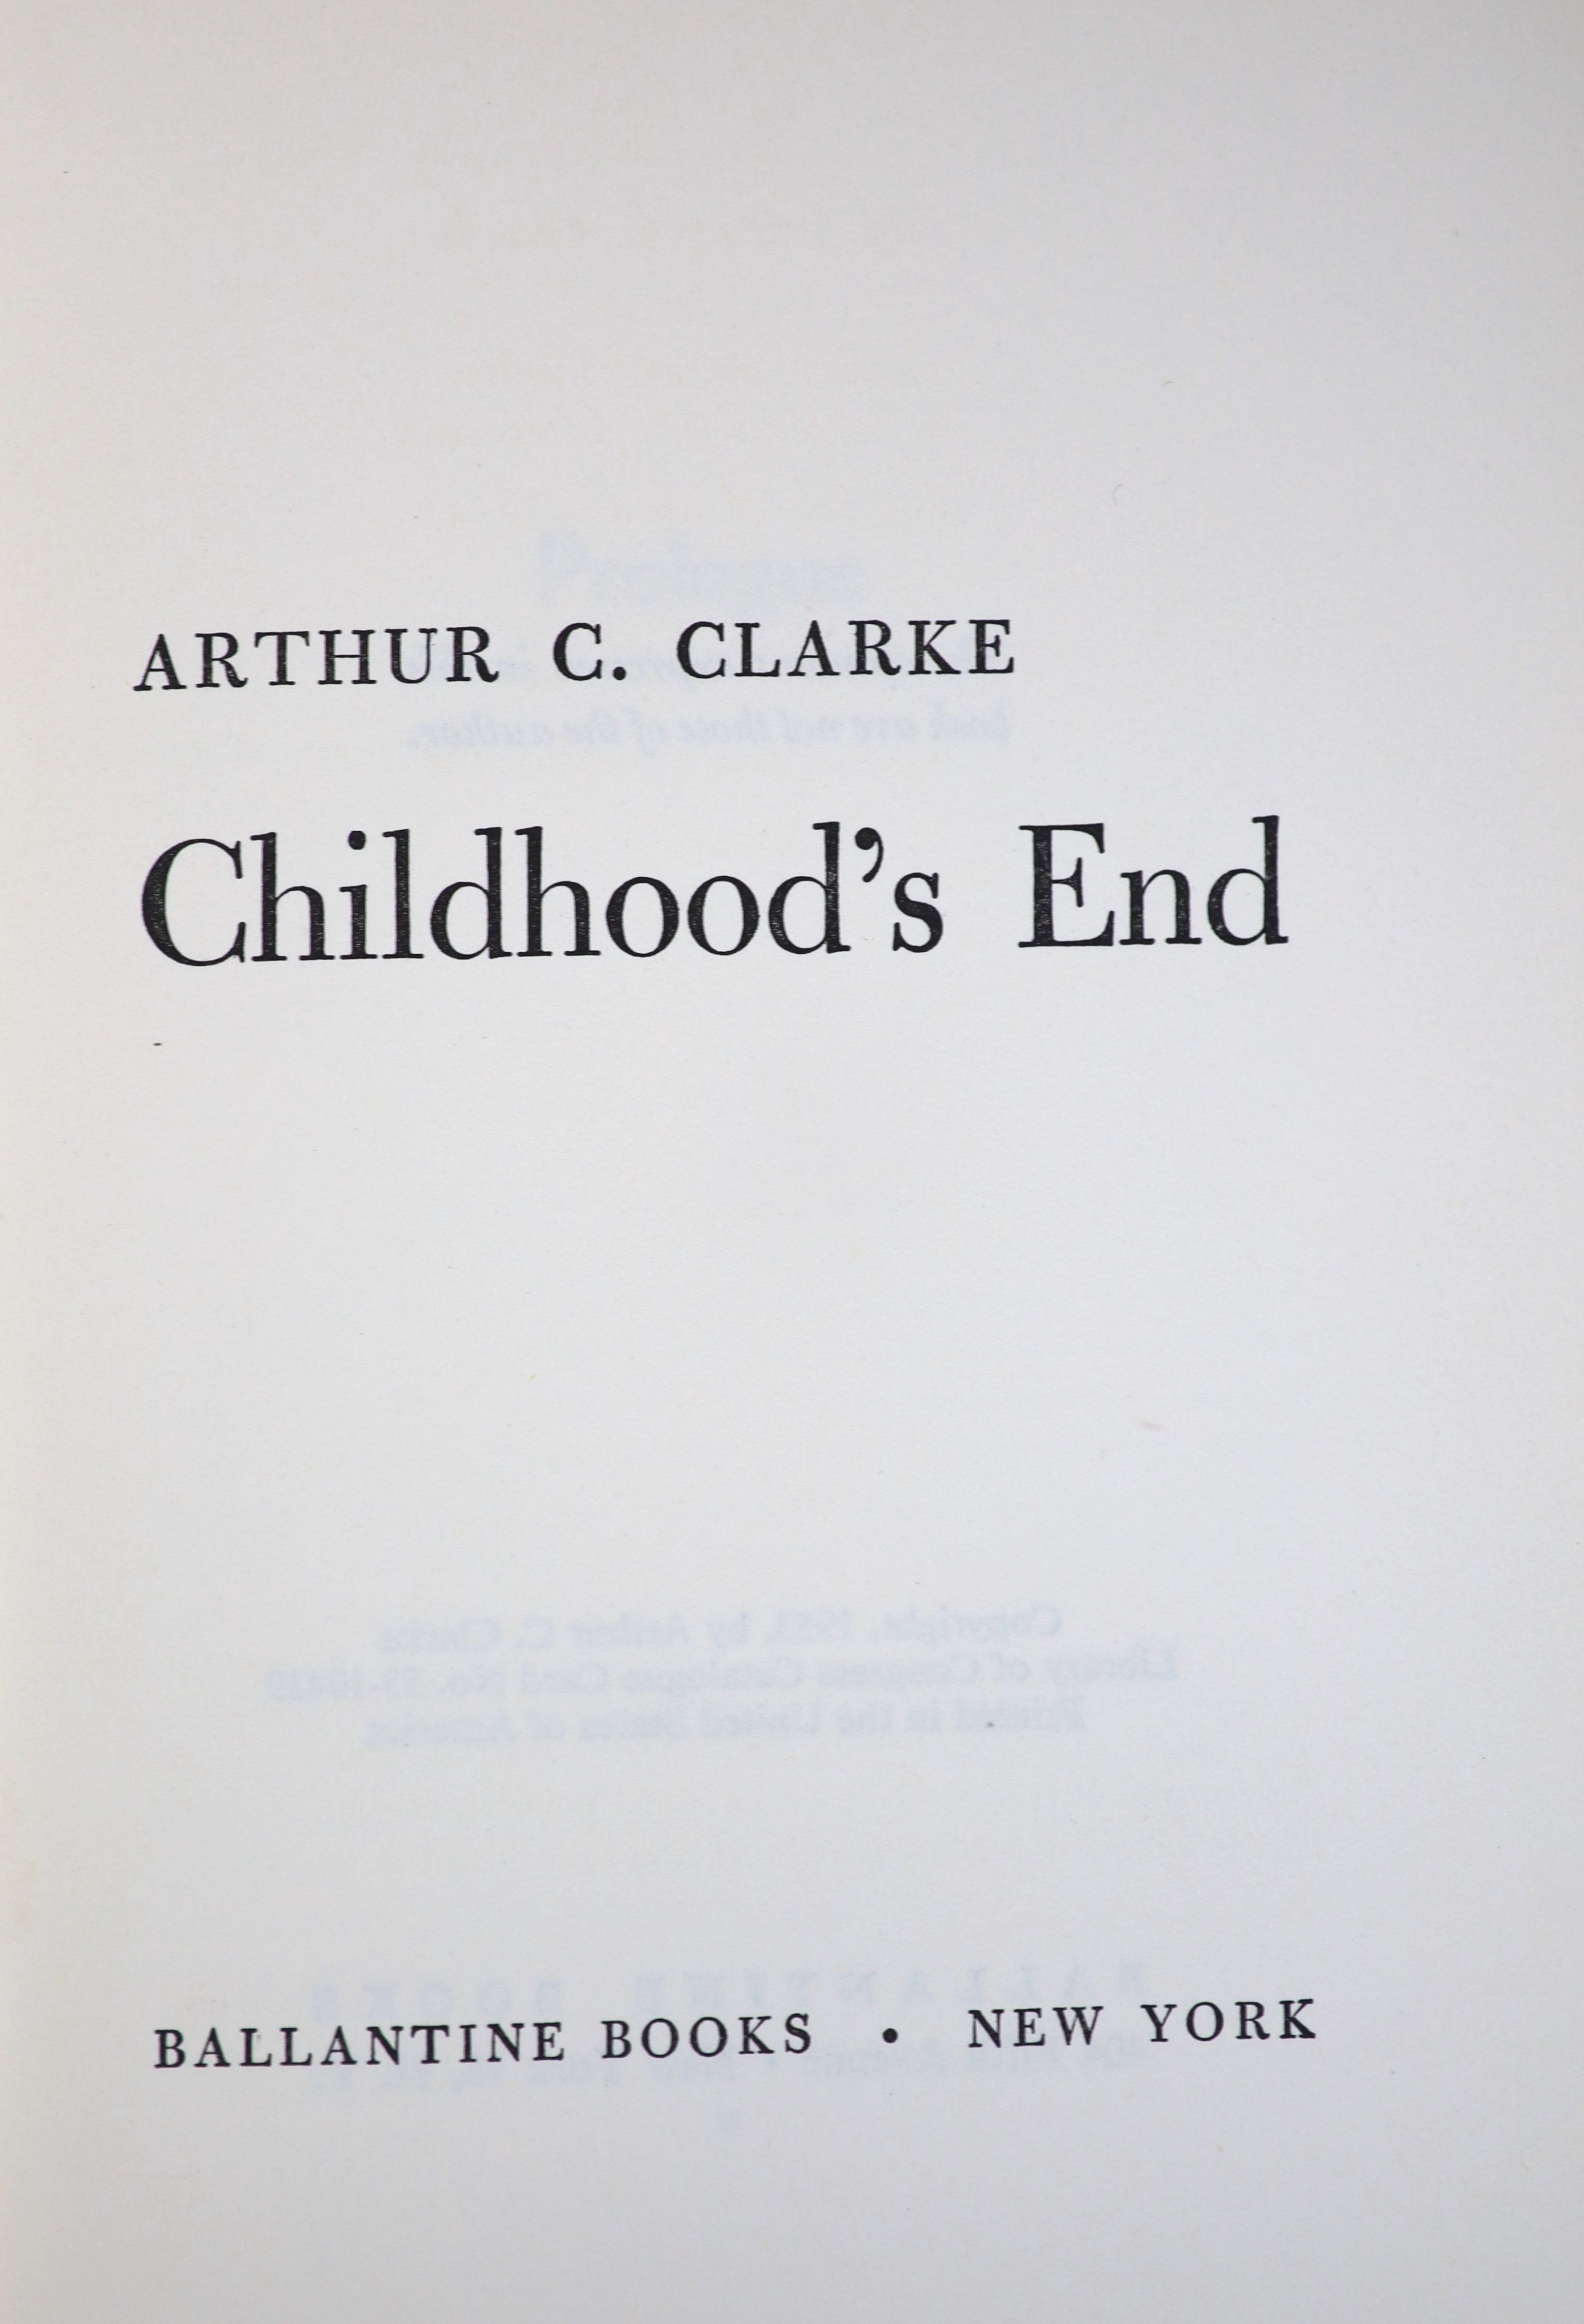 Clarke, Arthur C - Childhood’s End, 1st edition, red cloth, in unclipped d/j, with 1 inch tear to rear head of spine, 4 inch split to rear folded edge, Ballantine Books, New York, 1953